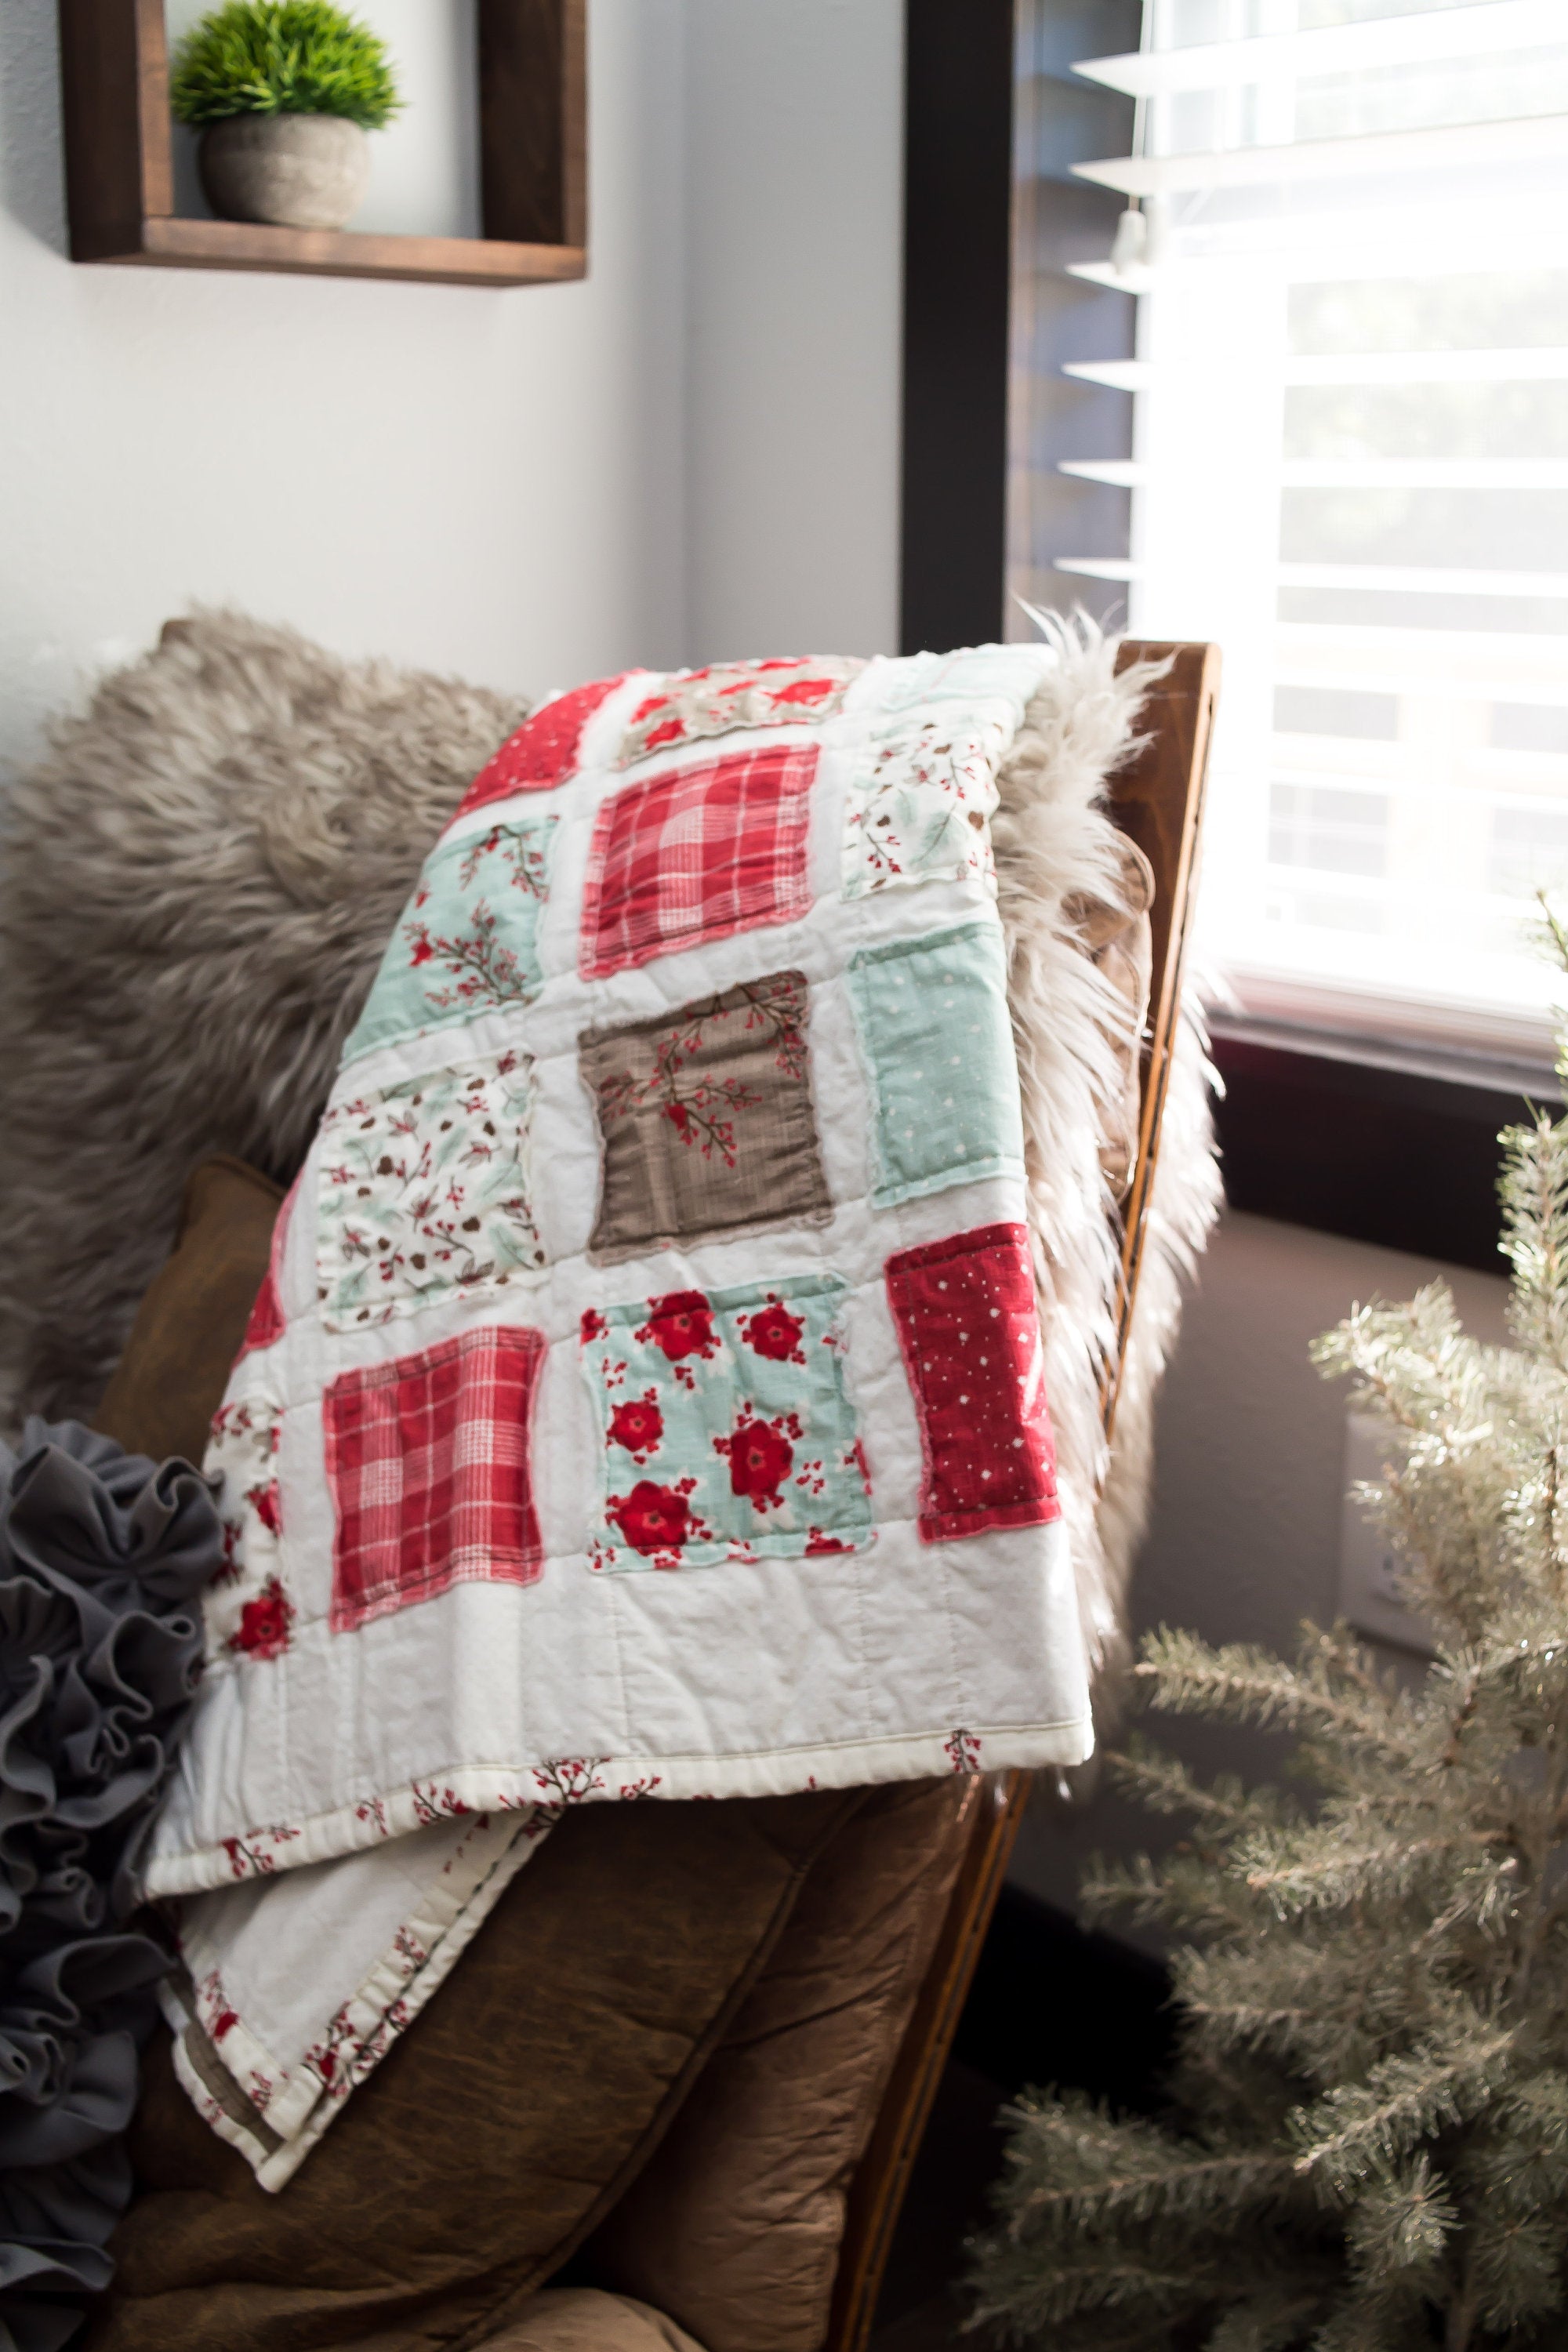 sugar-owl-designs-christmas-quilt-draped-over-a-living-chair